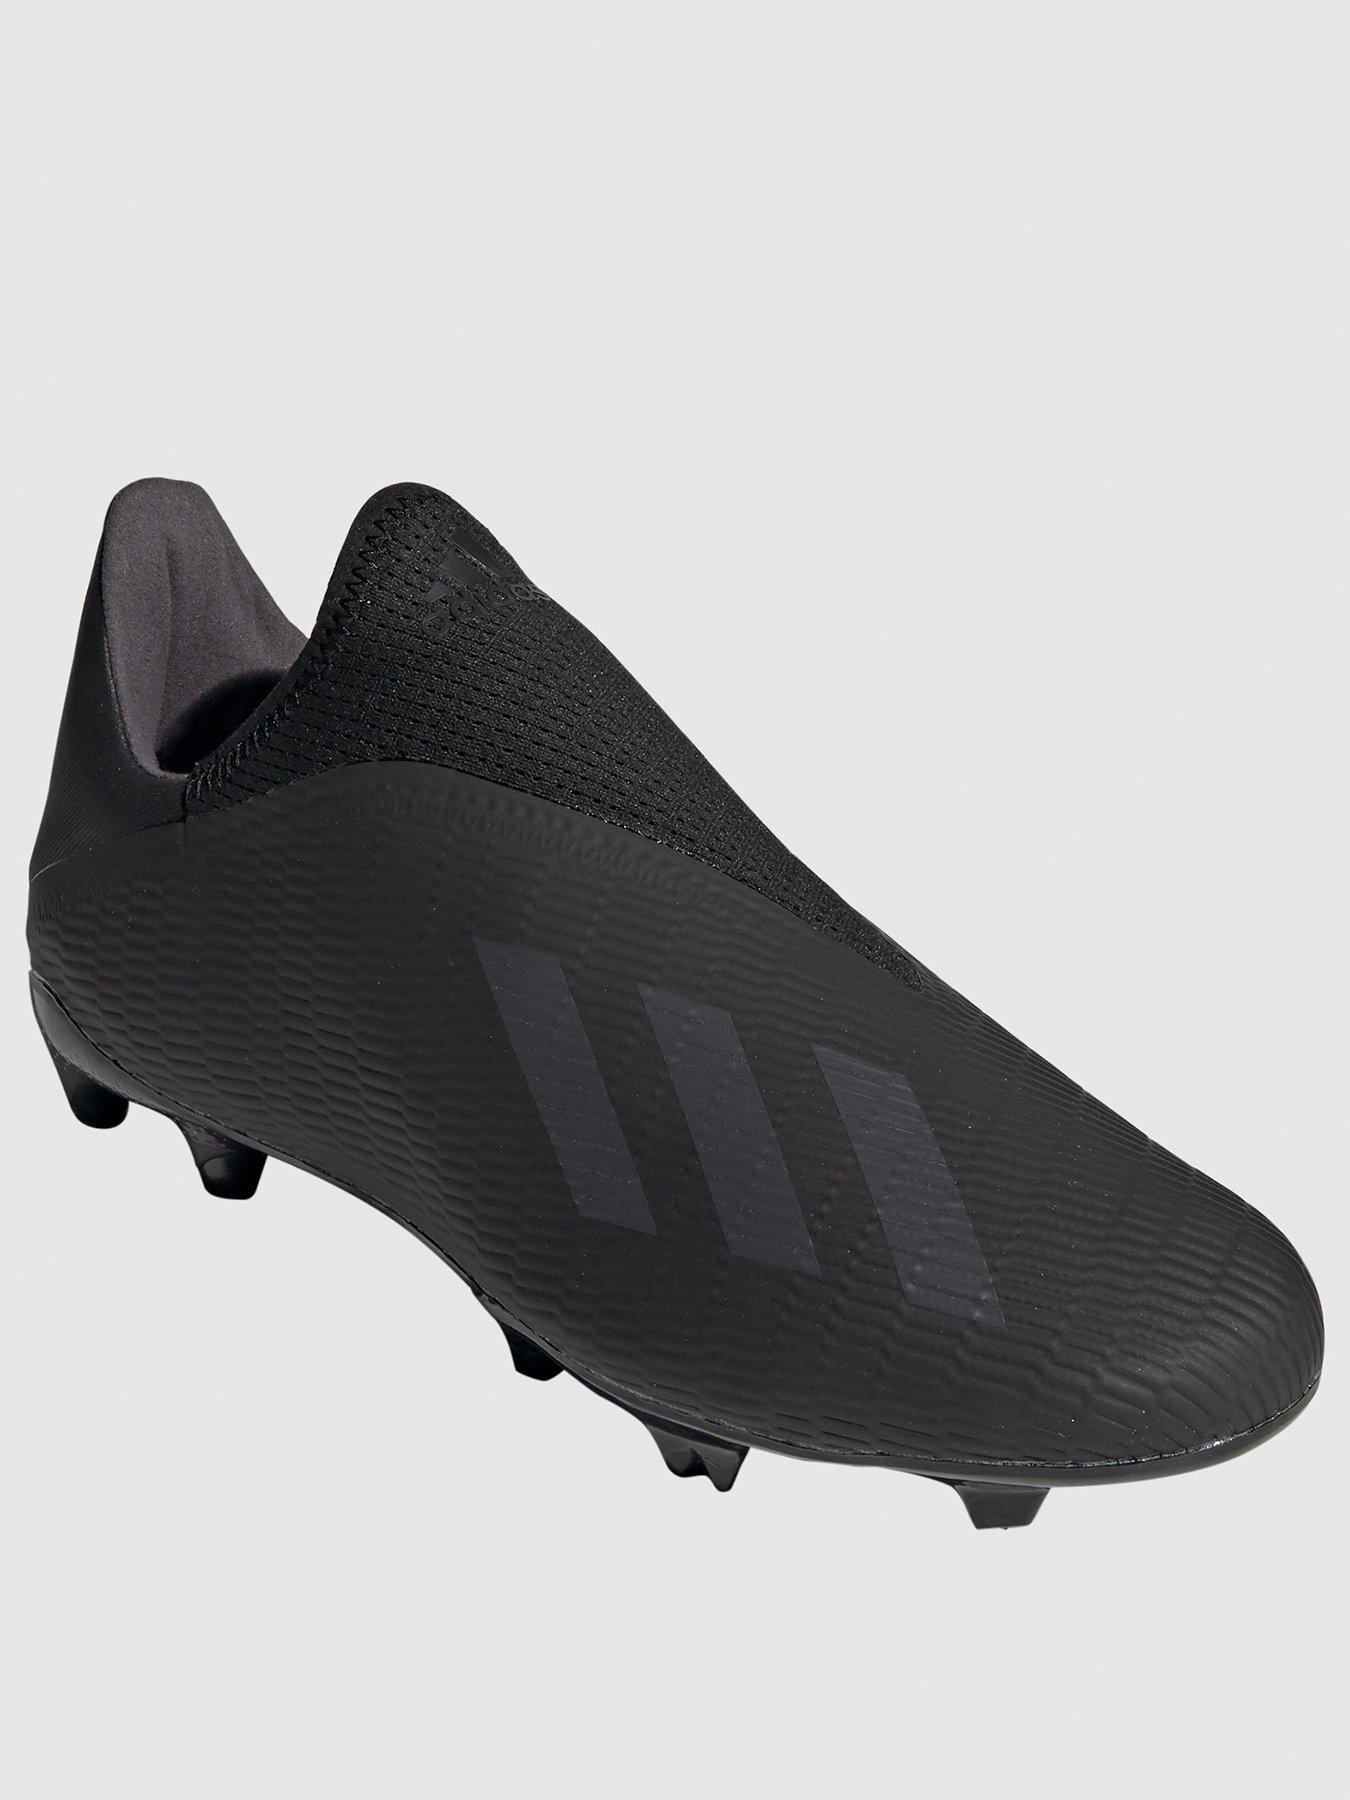 cheap laceless football boots size 6